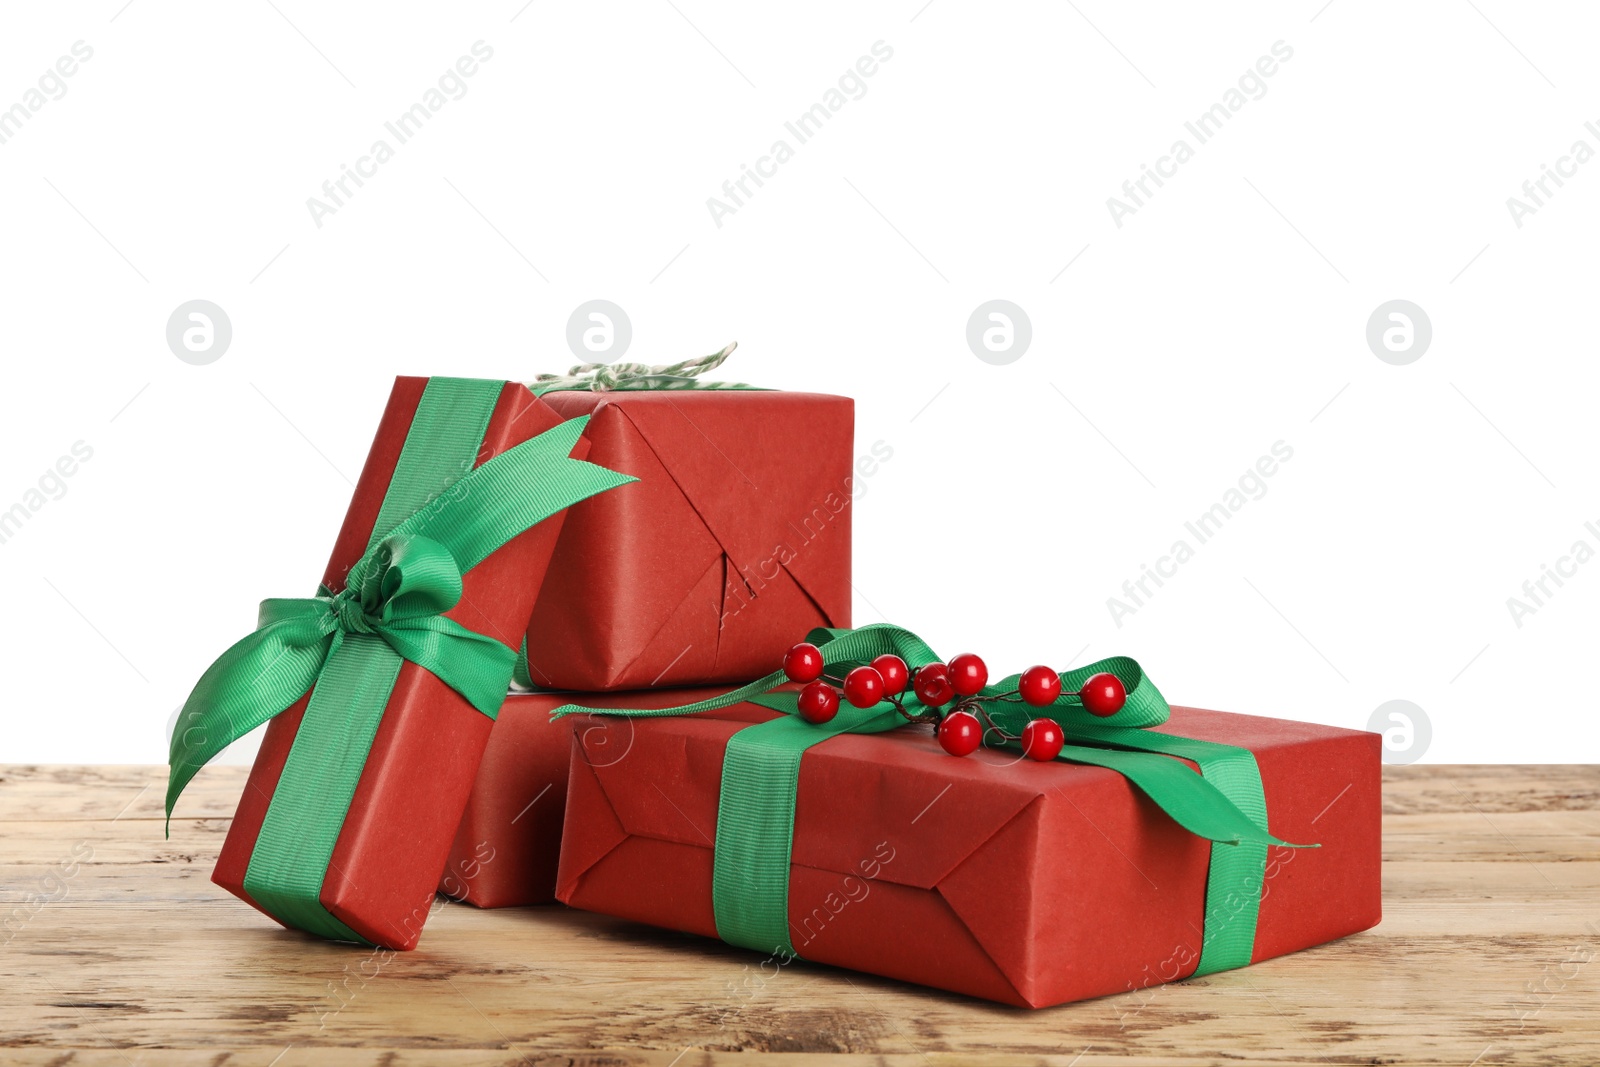 Photo of Christmas gifts with red berries on wooden table against white background